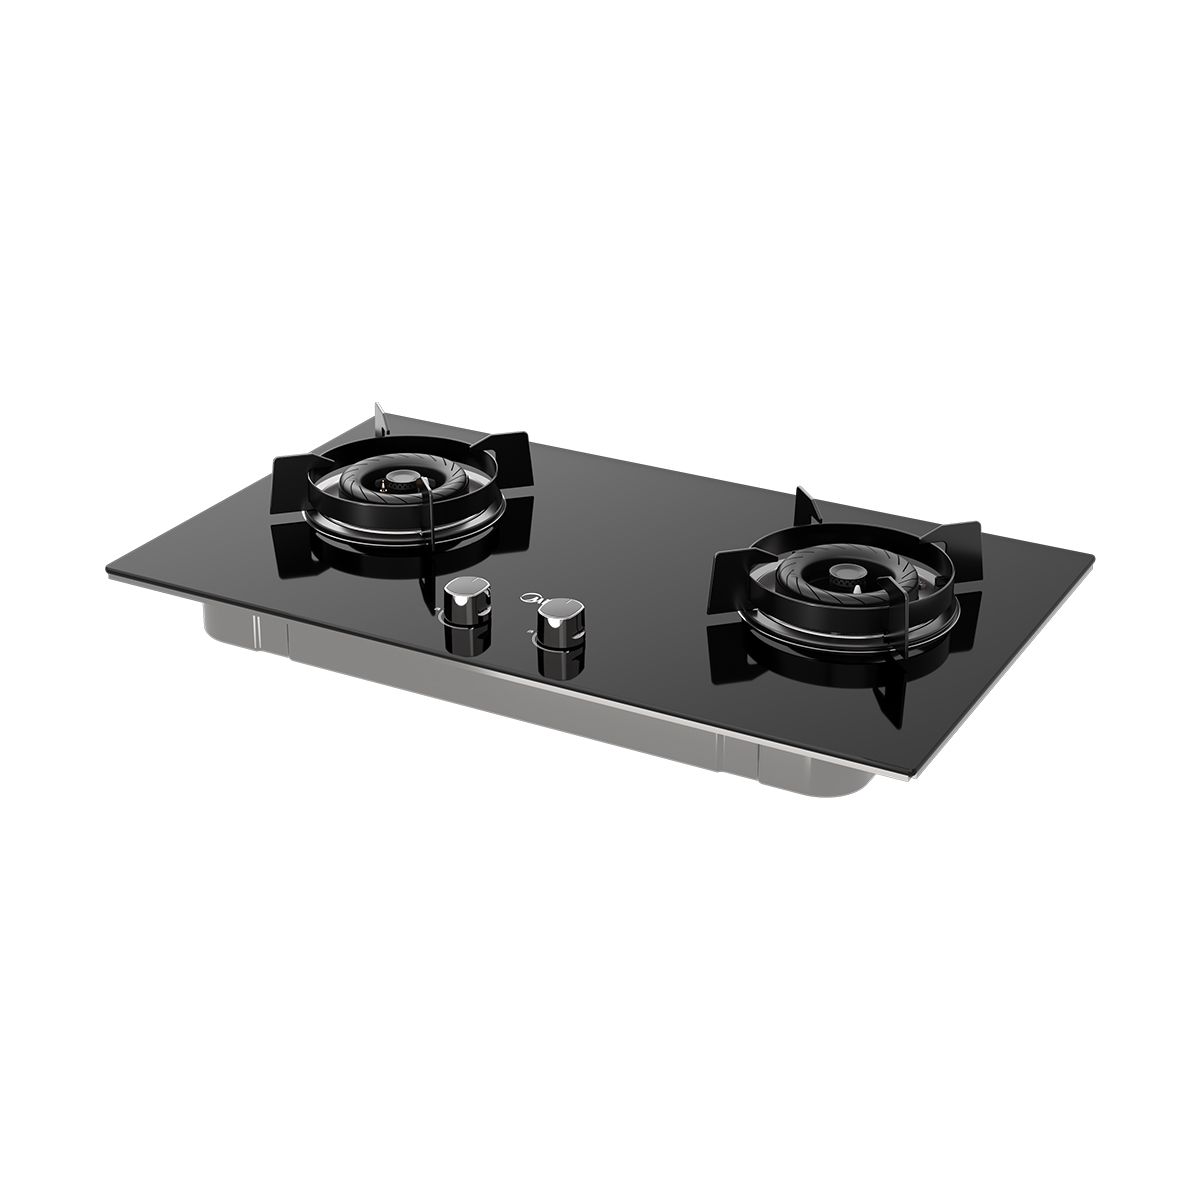 Description: Built-in Gas Hob with 5.2kW Burners - MGH-2461GL